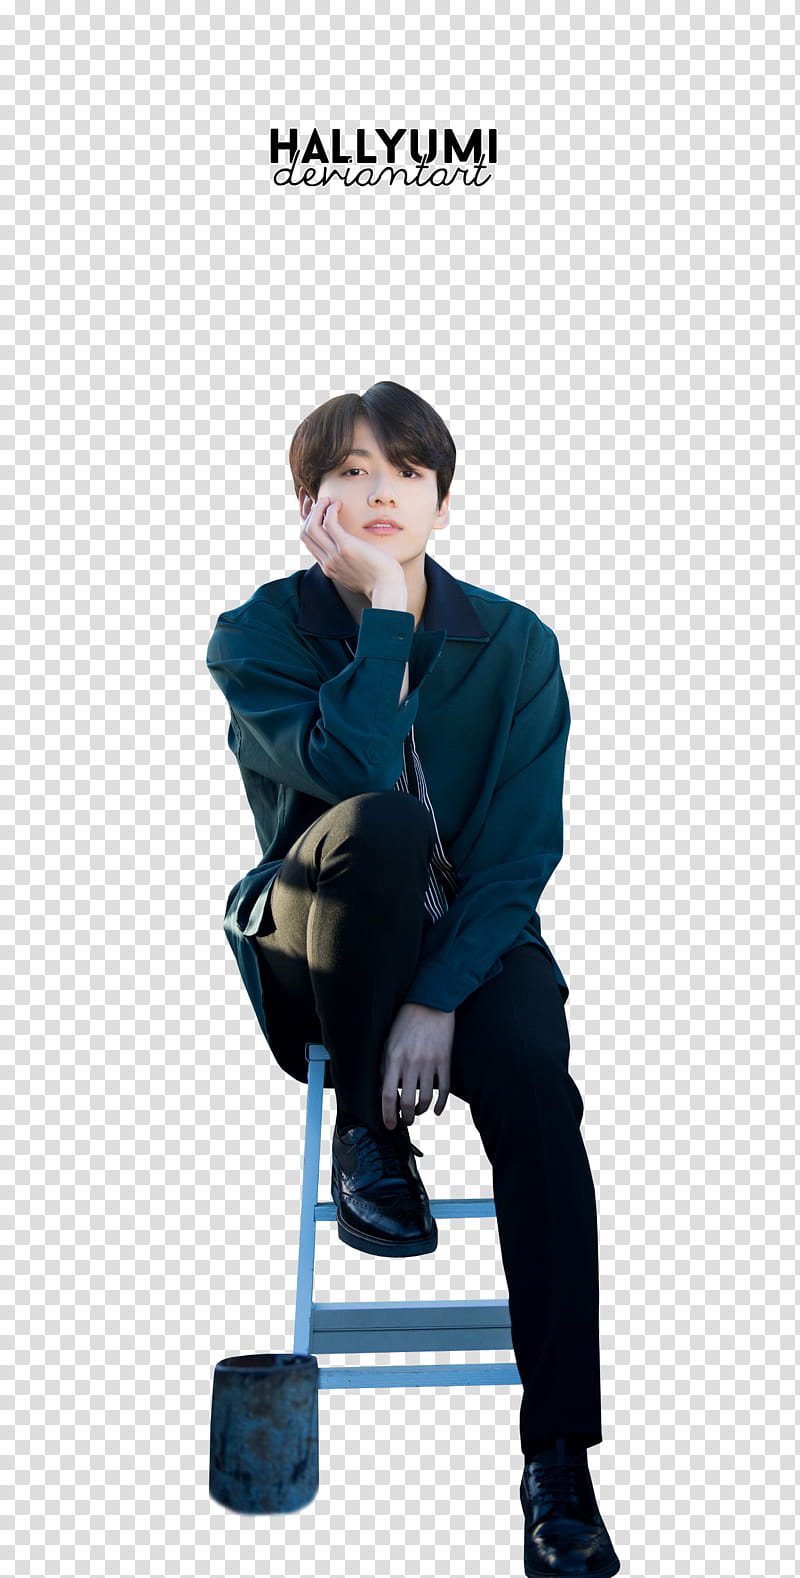 JungKook BTS TH ANNIVERSARY, man wearing black and green jacket transparent background PNG clipart